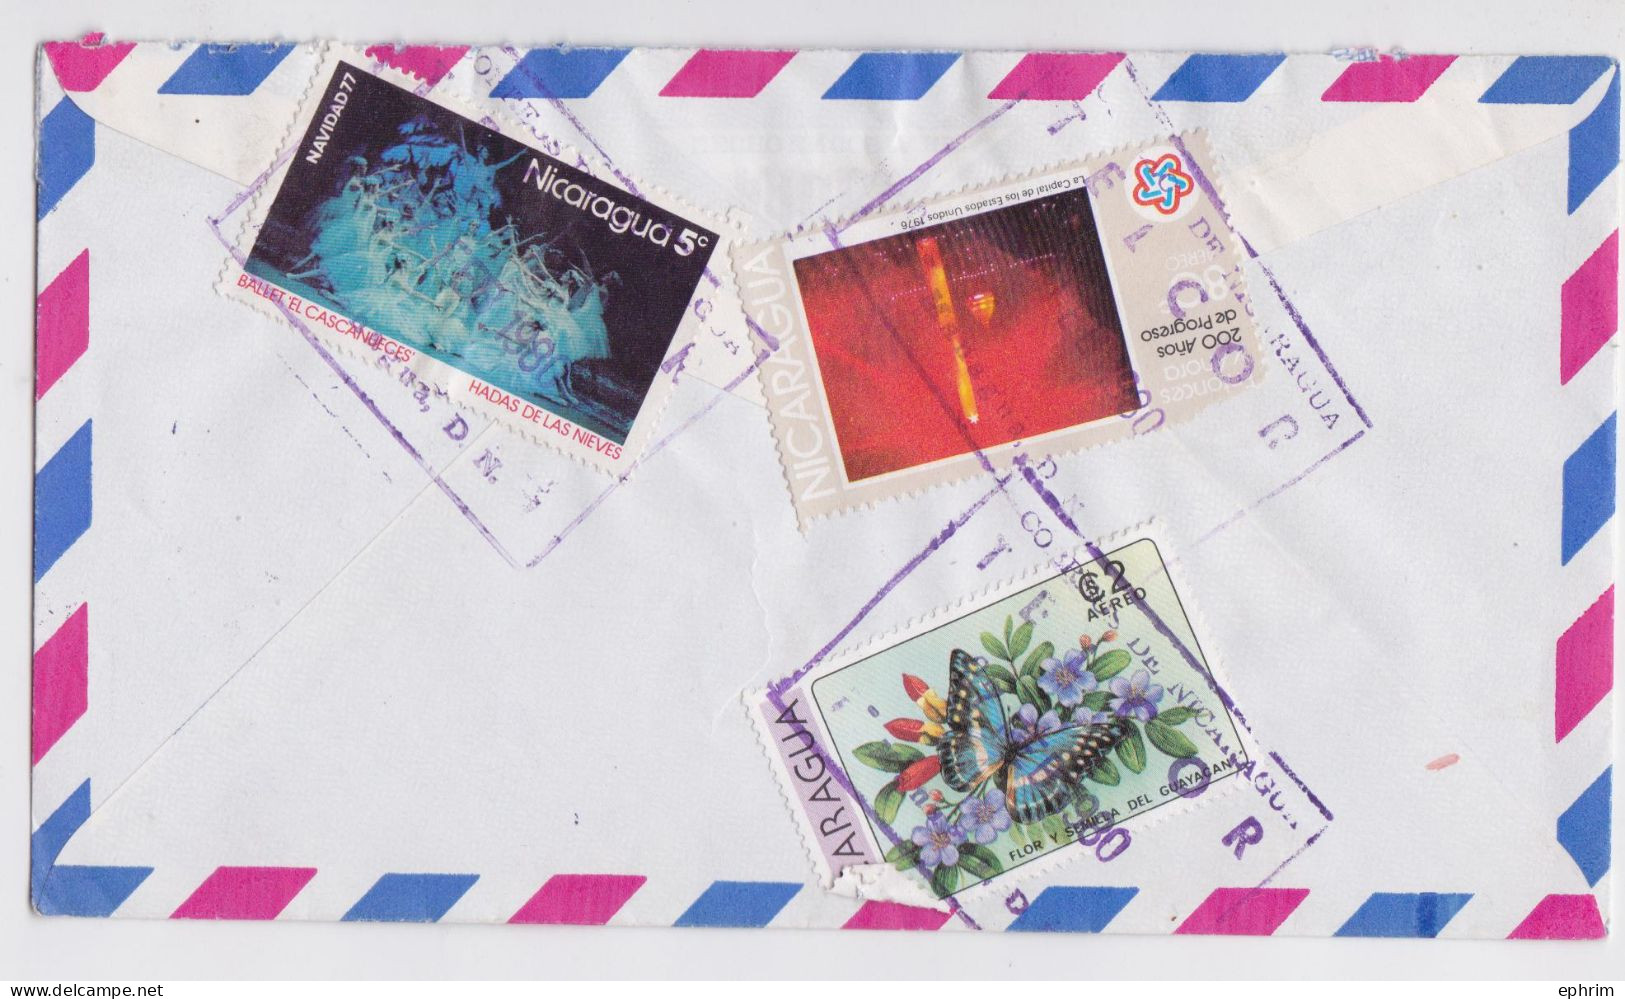 Nicaragua Lettre Timbre Papillon Butterfly Washington Ballet Stamp Short Air Mail Cover Correo Aereo Sello 1980 - Nicaragua